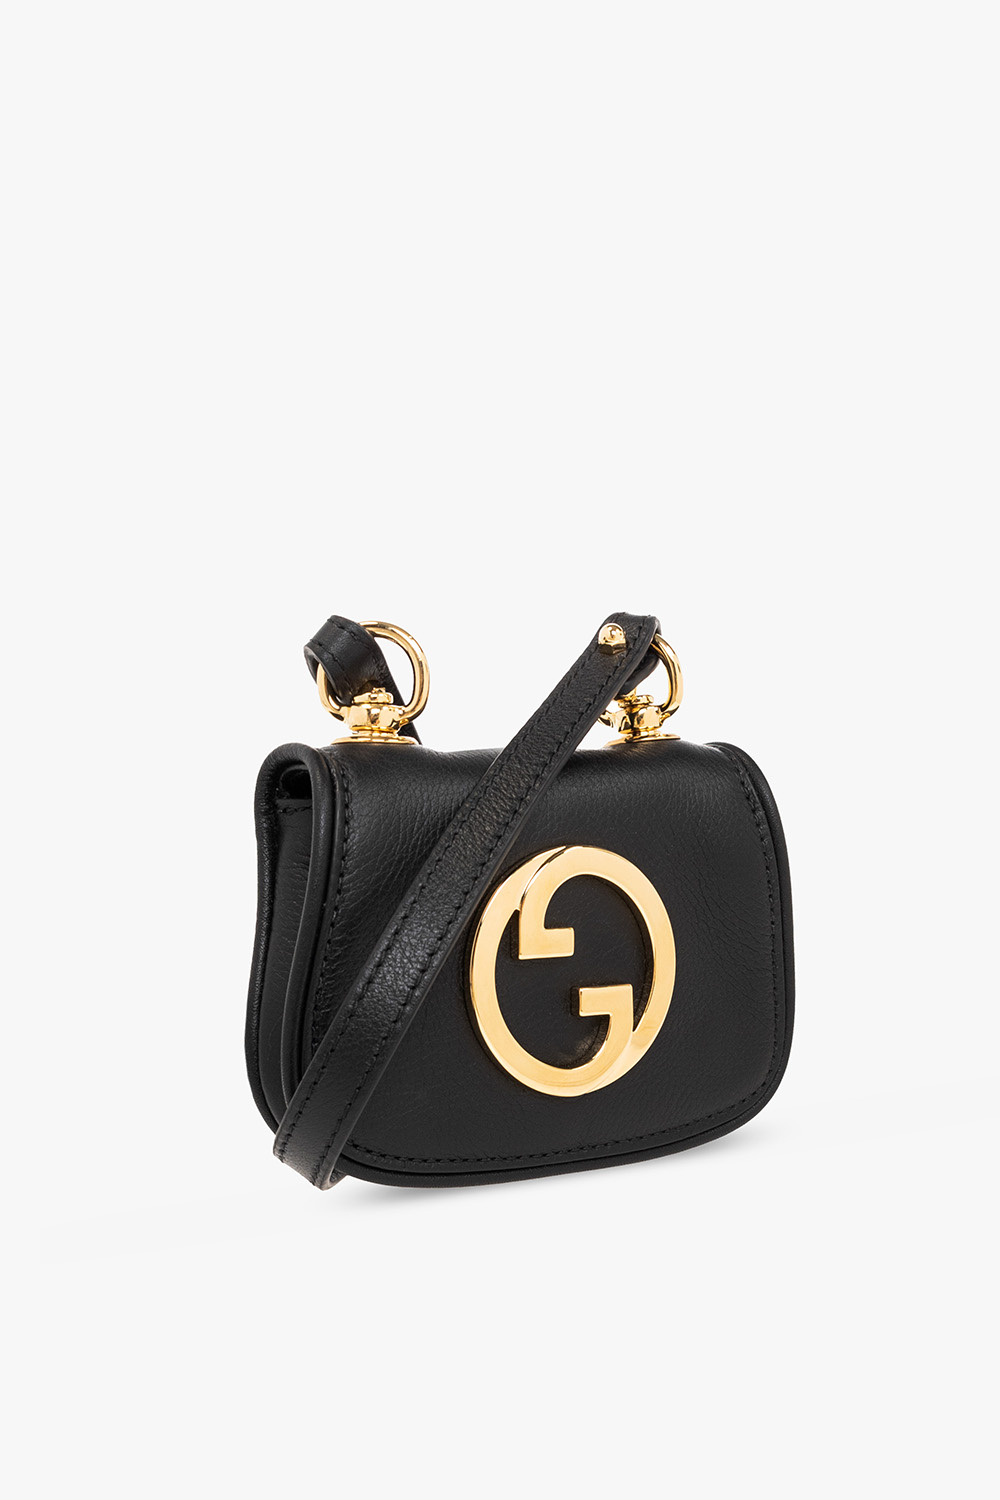 Gucci ‘Blondie’ strapped pouch